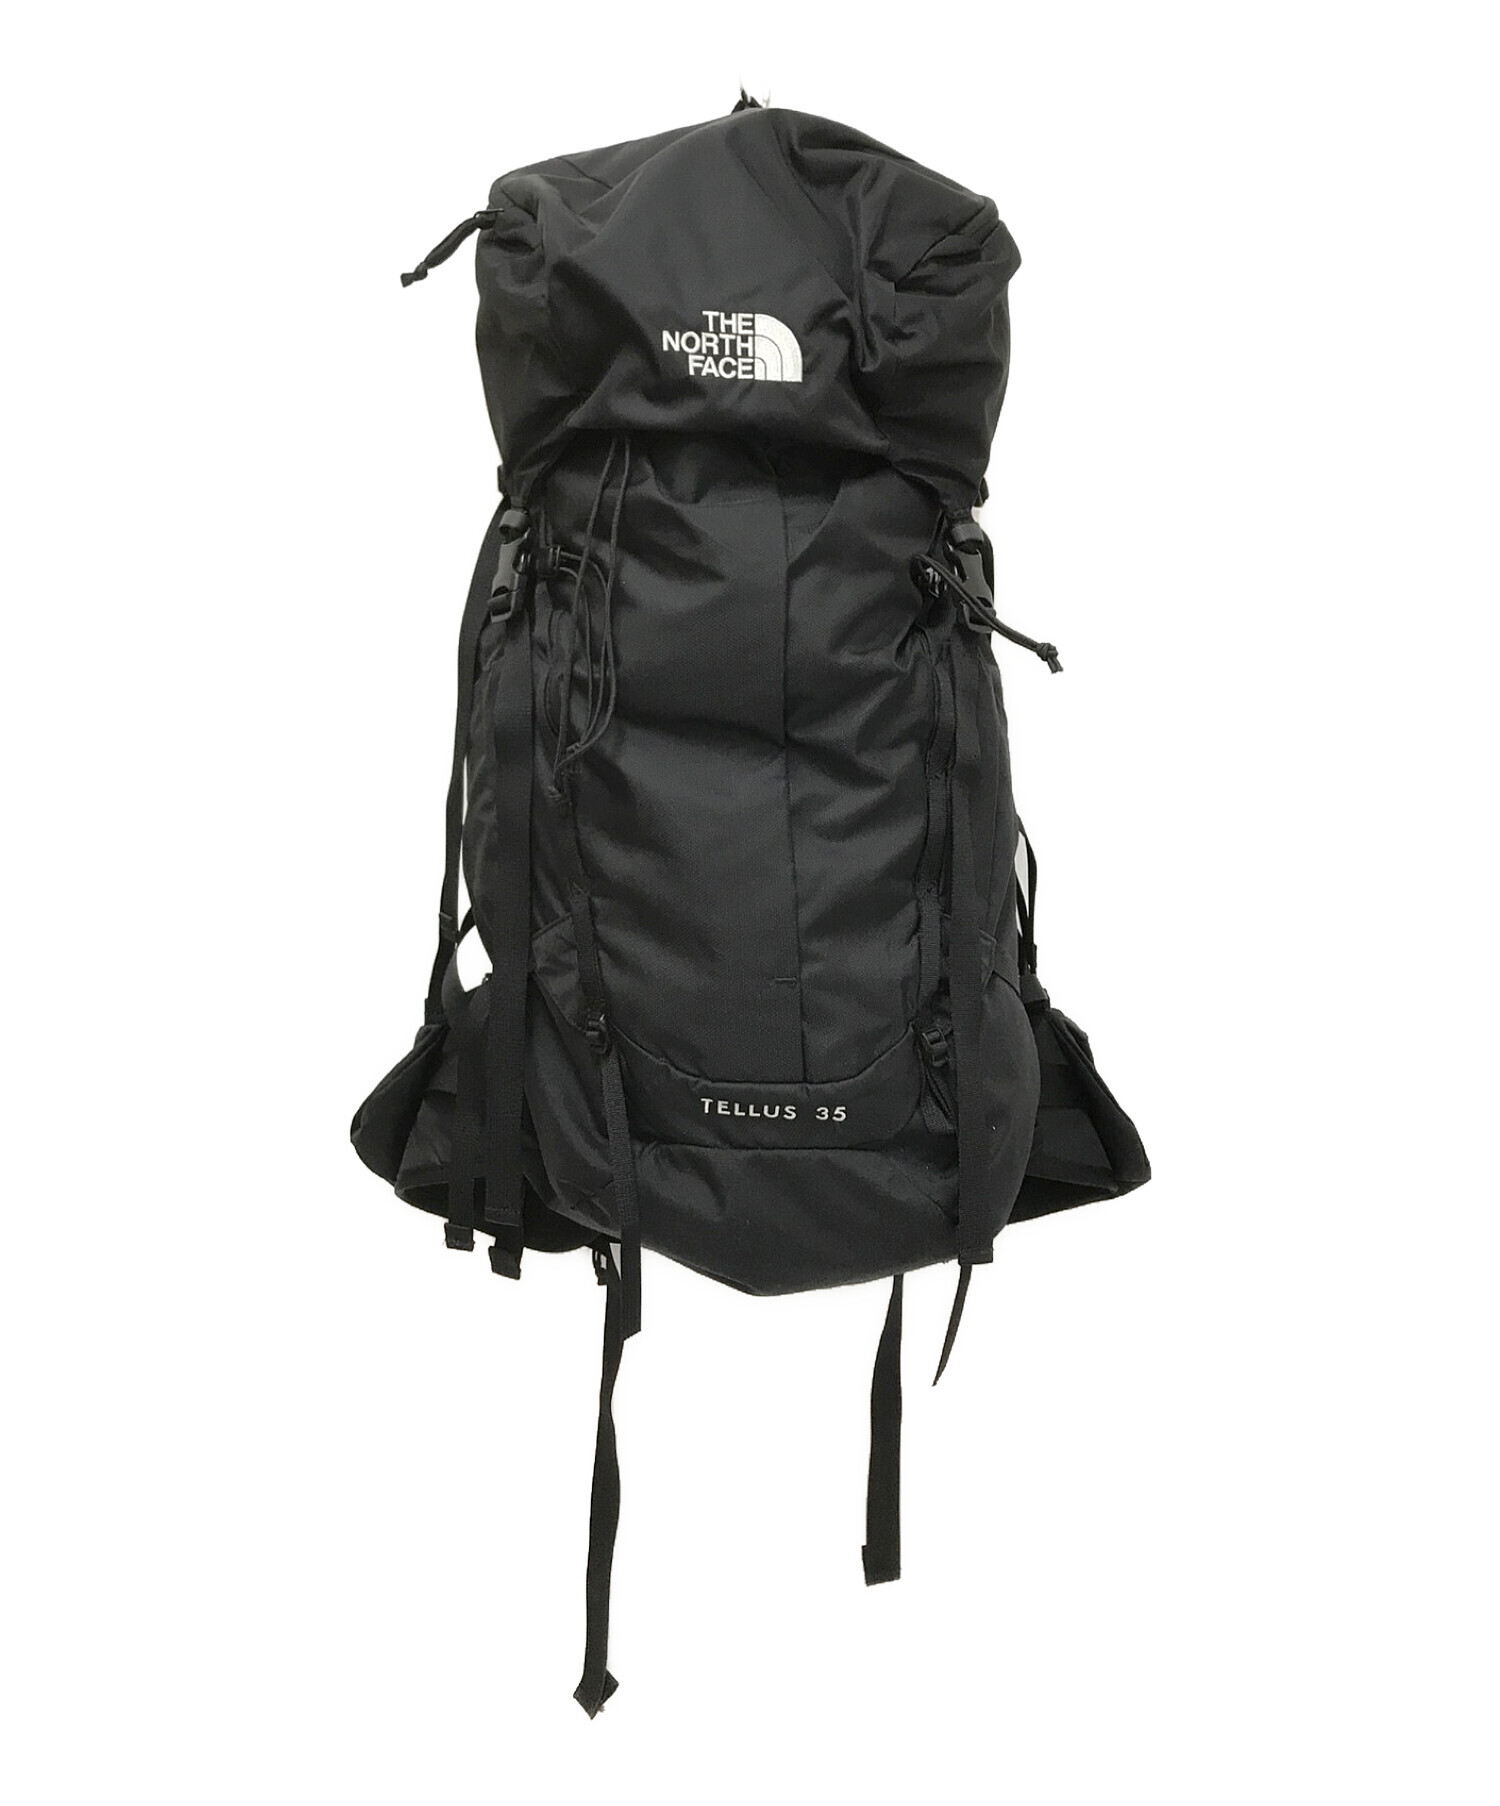 NORTH FACE TELLUS35 backpack